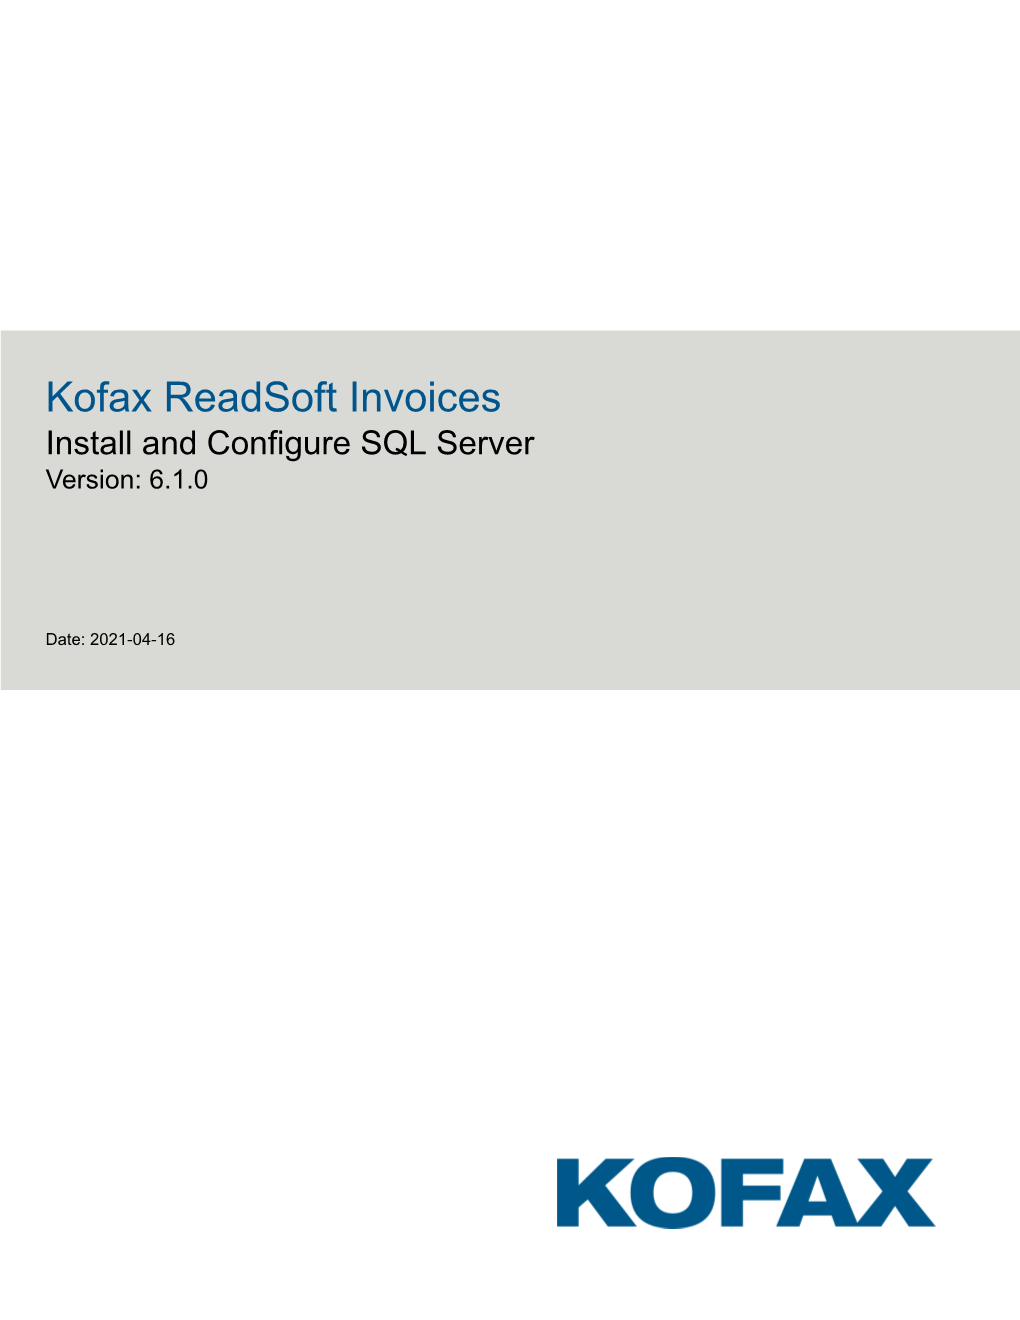 Kofax Readsoft Invoices Install and Configure SQL Server Version: 6.1.0